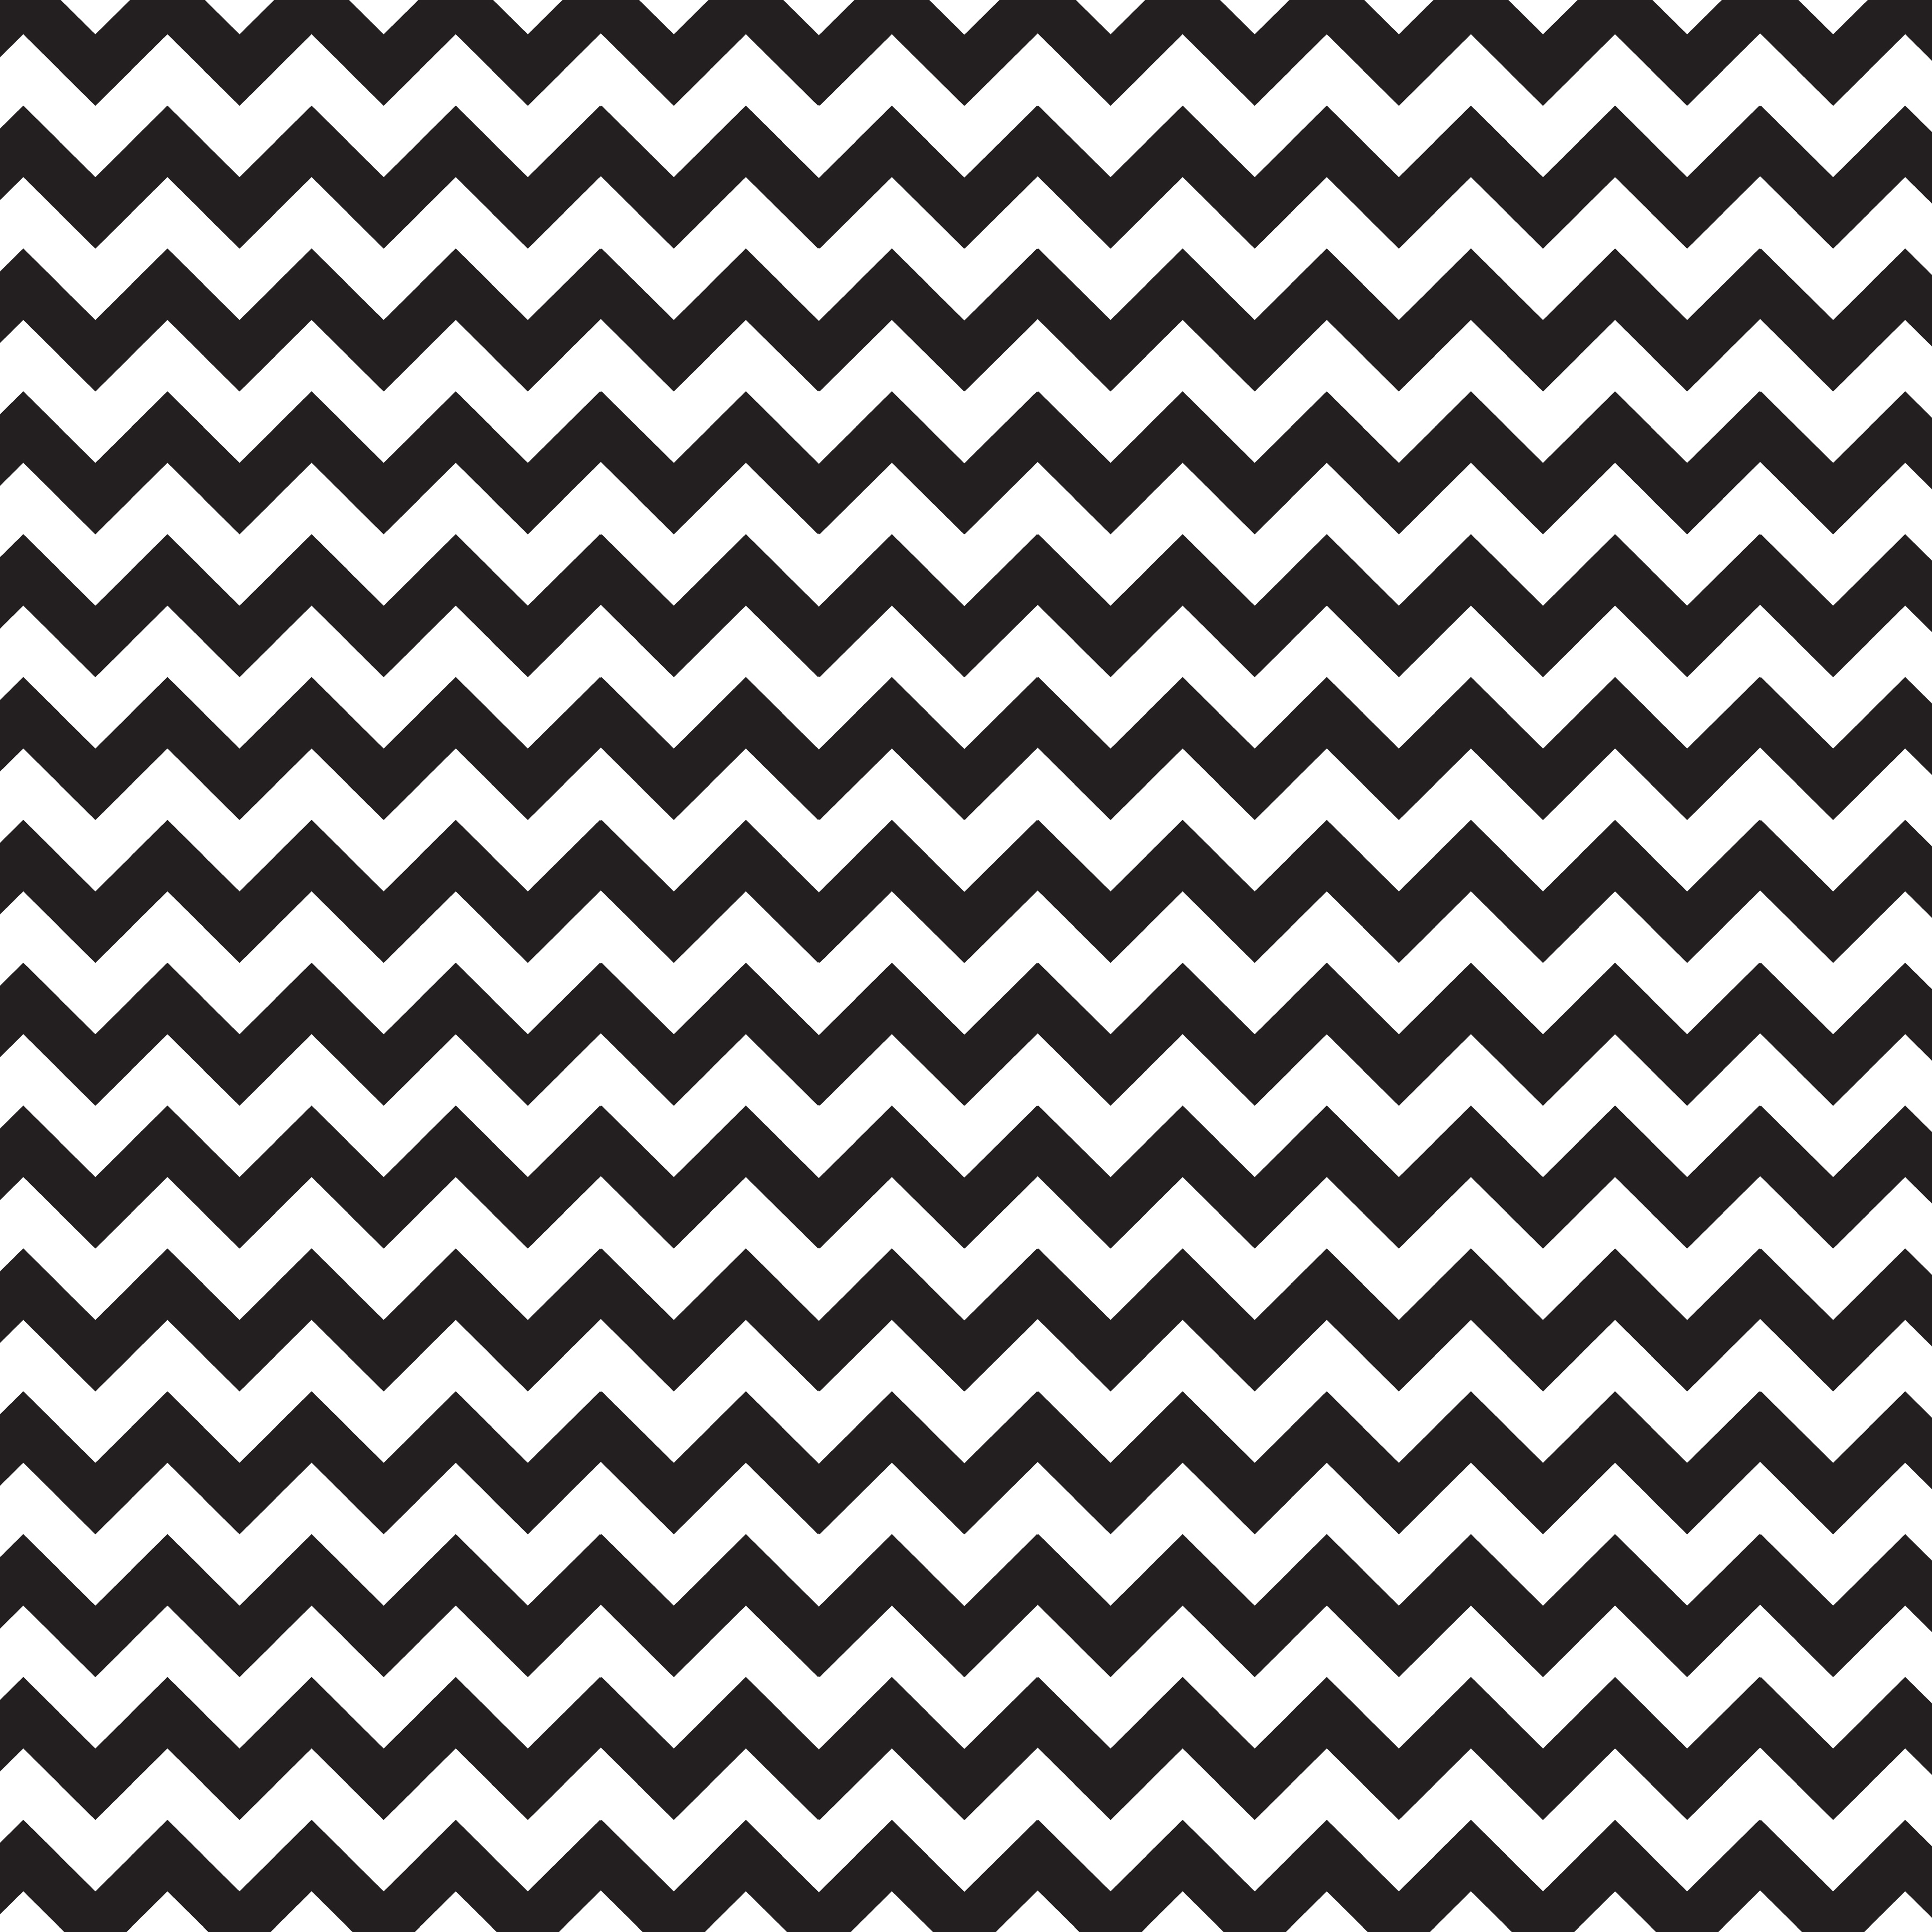 Background With Black And White Chevron For Desktop B M